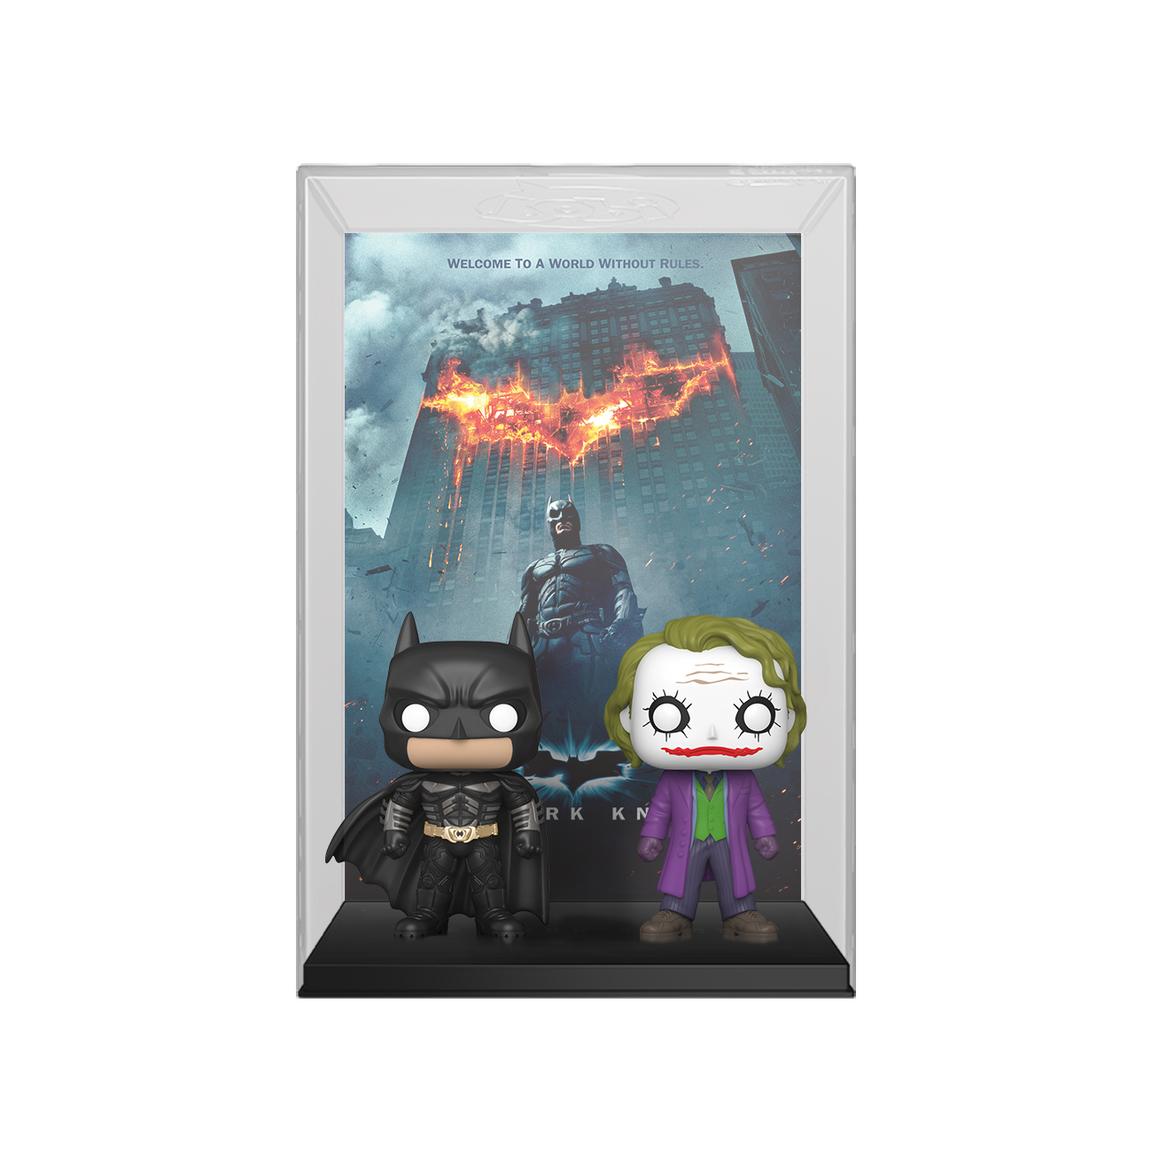 Funko POP Movie Poster: The Dark Knight Batman and The Joker Vinyl Figure 2-Pack Set with Poster